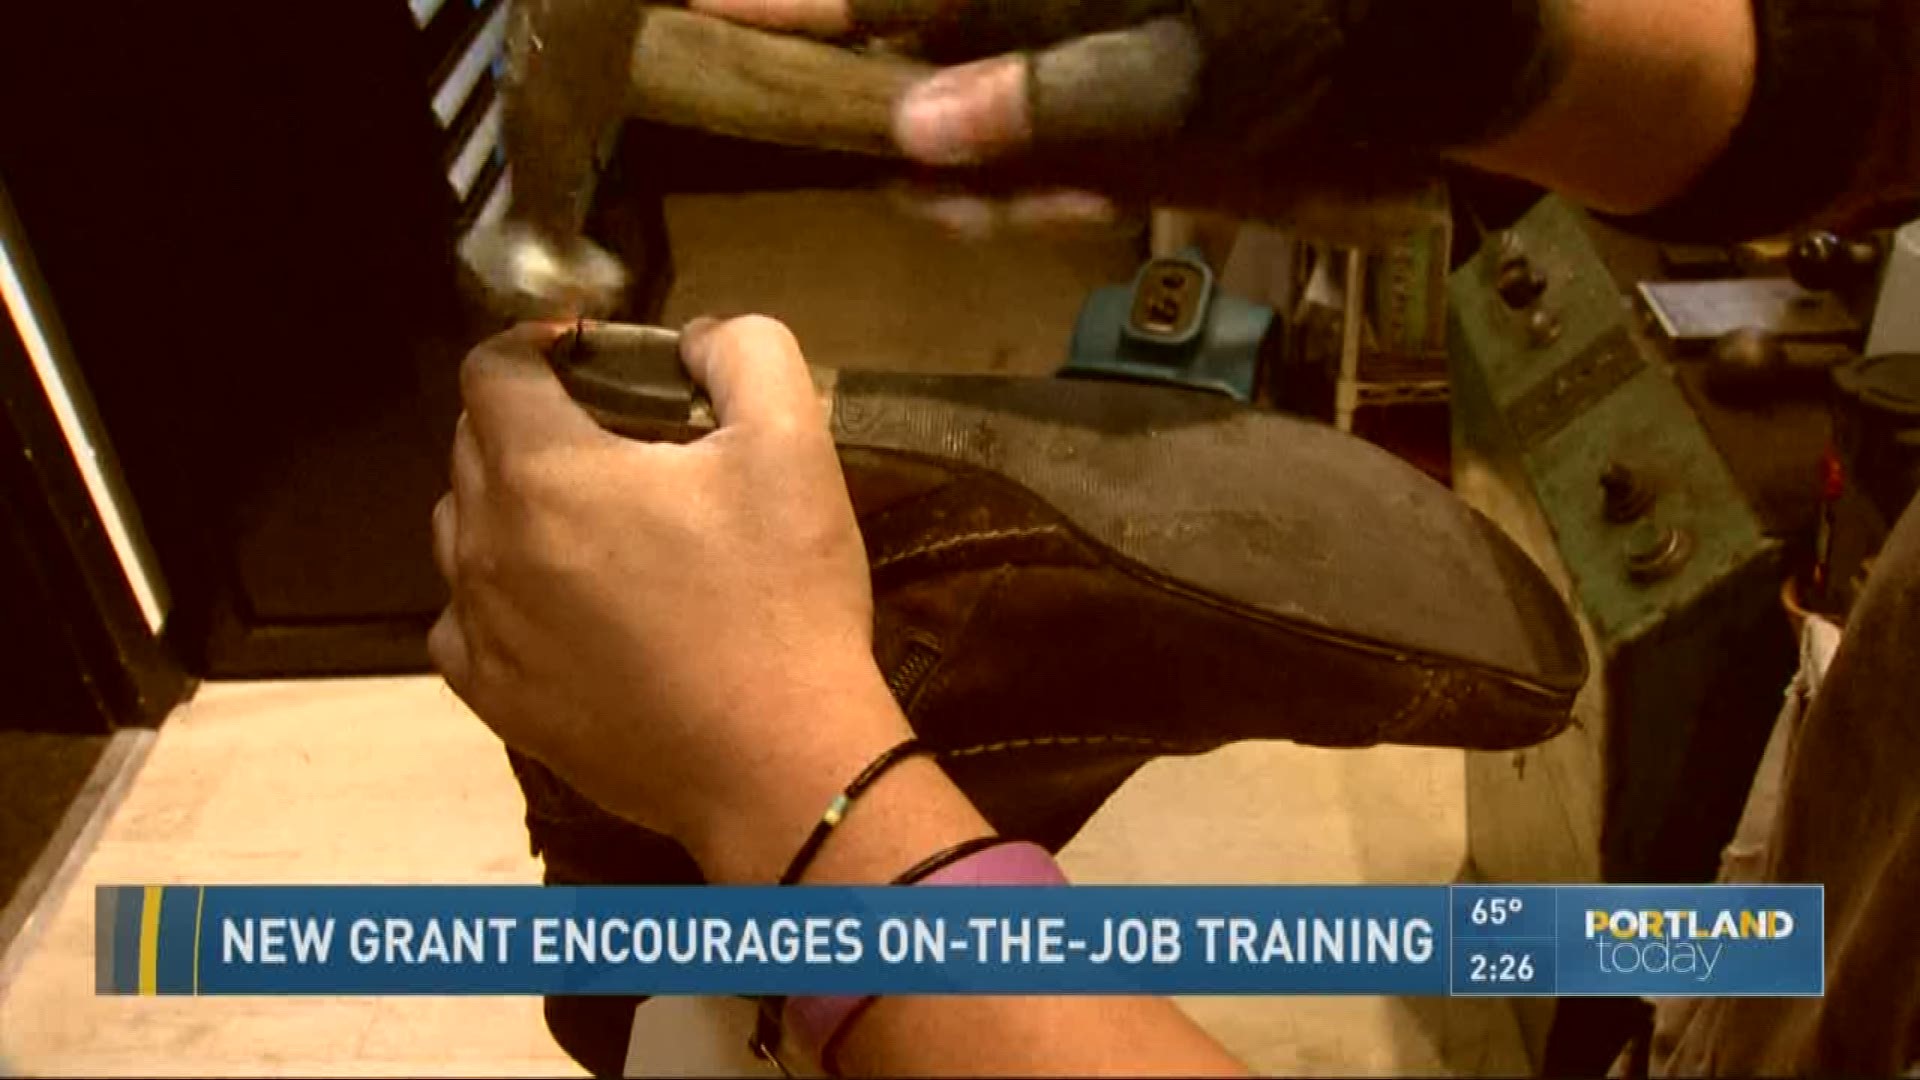 New grant encourages on-the-job training